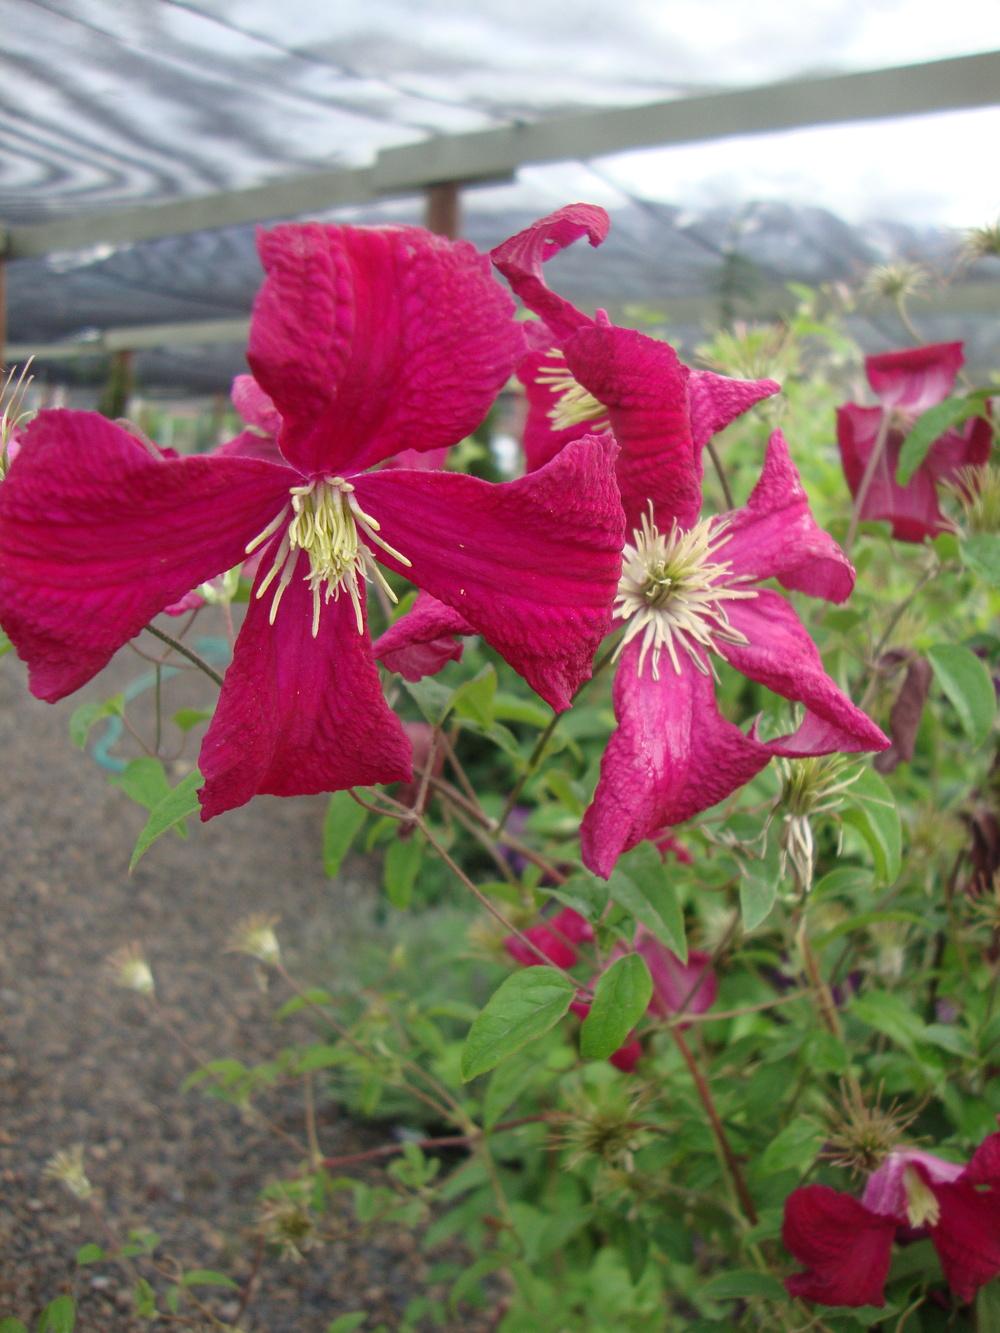 Photo of Clematis (Clematis viticella 'Madame Julia Correvon') uploaded by Paul2032